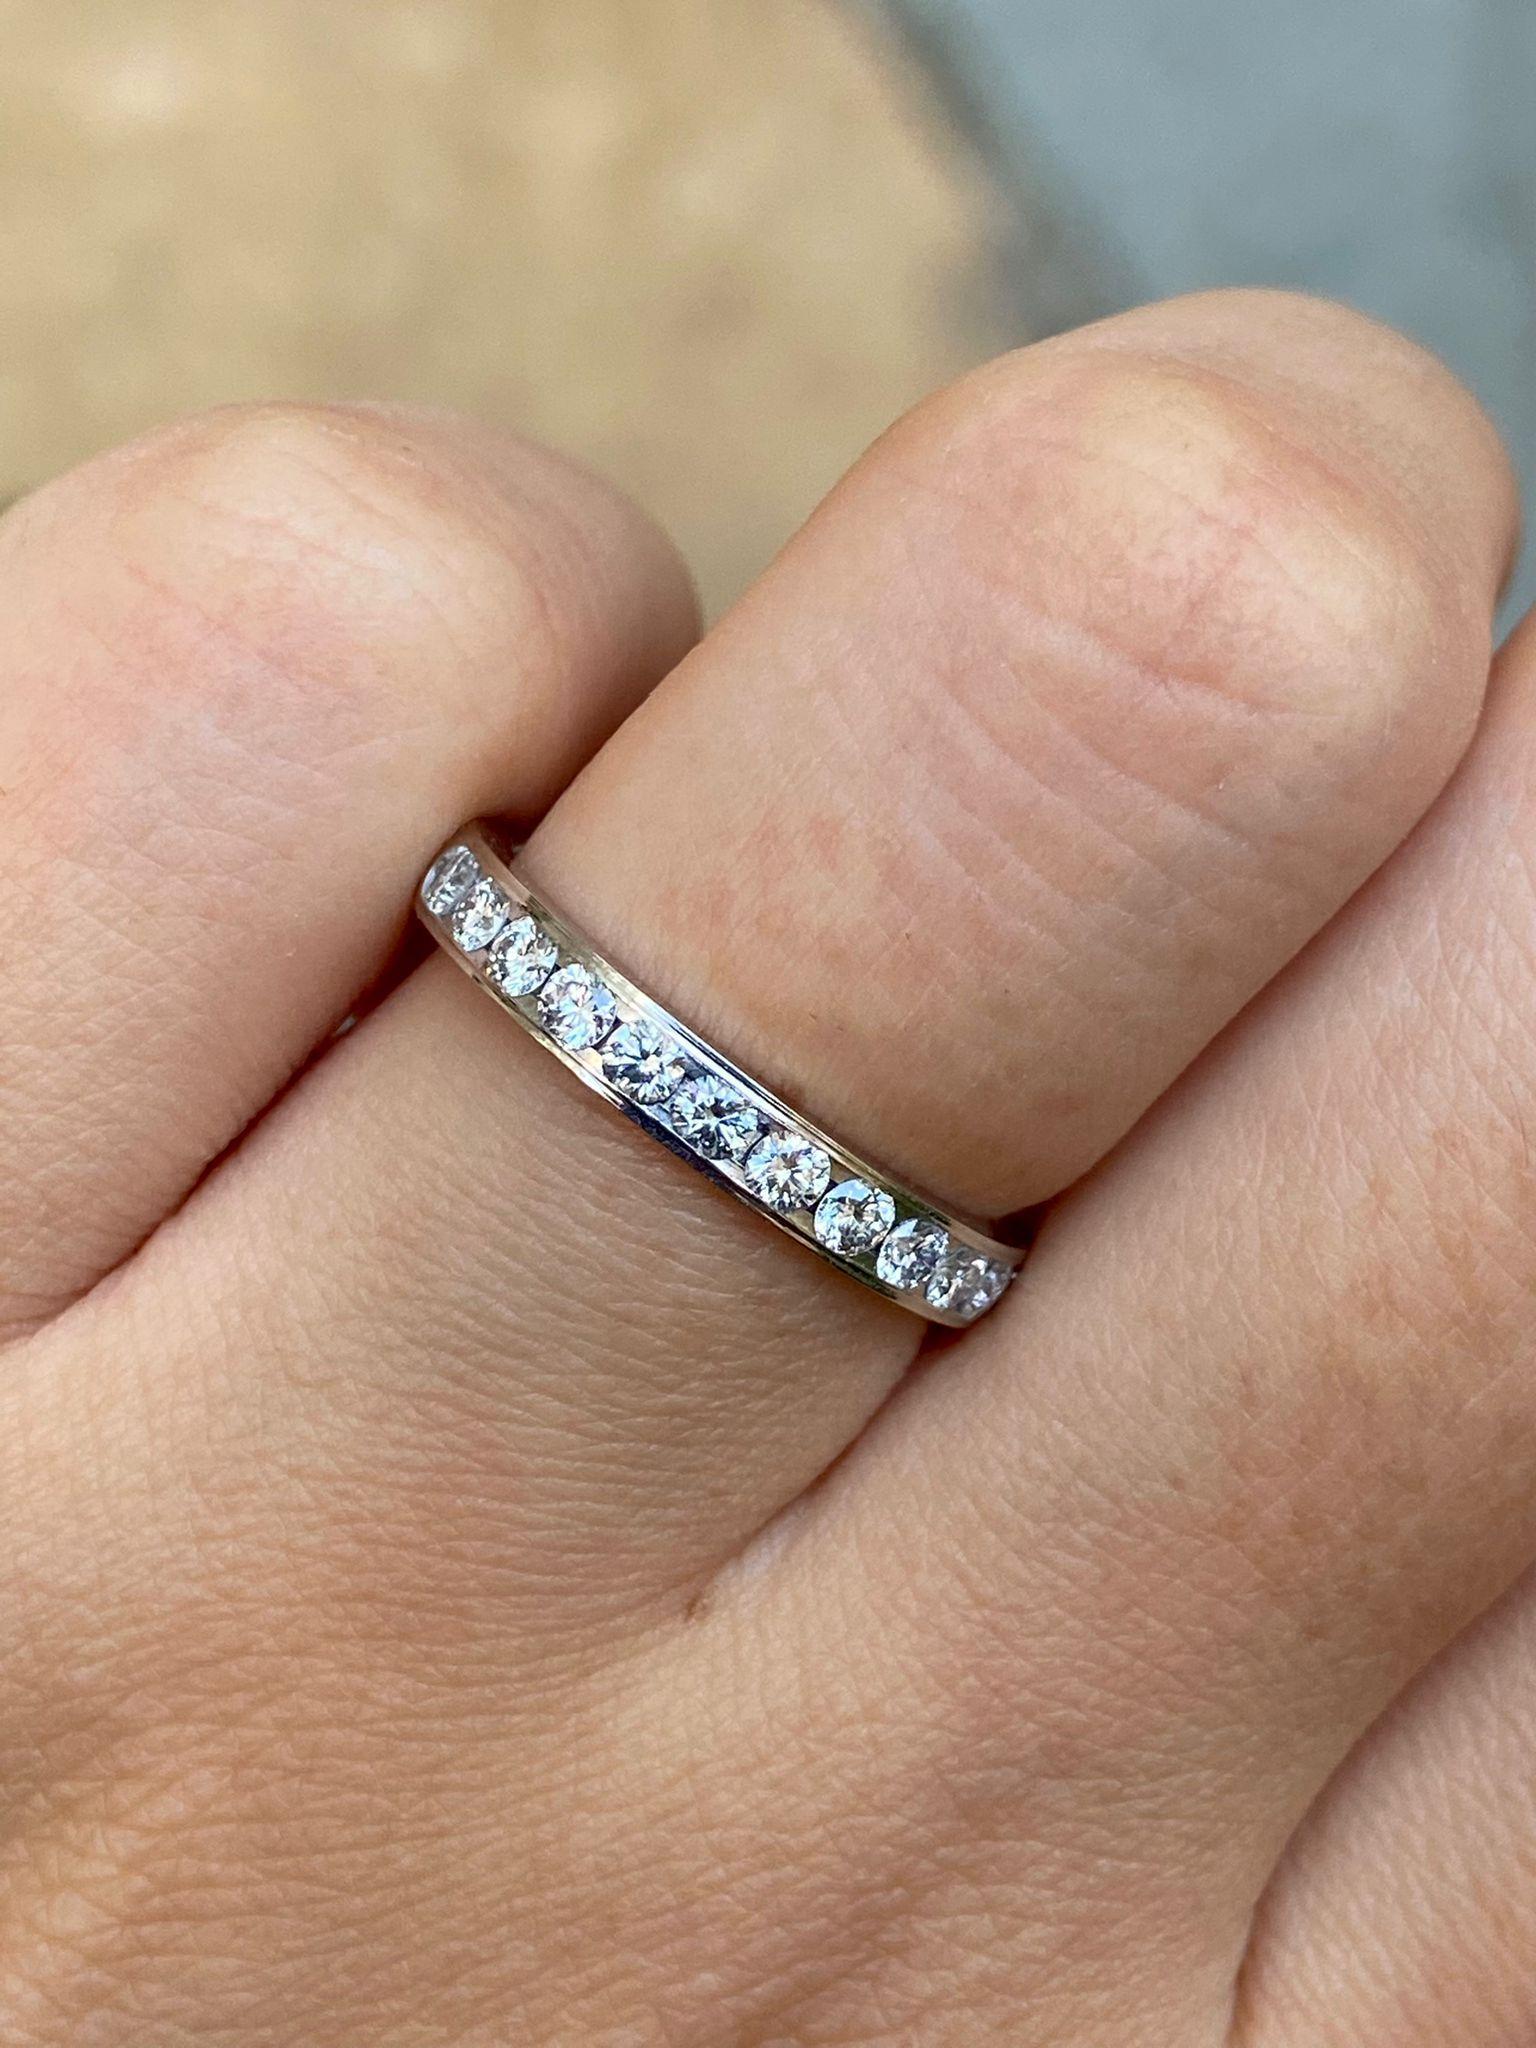 GORGEOUS Round diamond Ring from our EXQUISITE WEDDING BAND design collection!
Made by Benchmark rings in USA.
Beautiful to wear alone or with your engagement ring. Perfectly stackable with any many other style bands.

There are 12 Round Brilliant